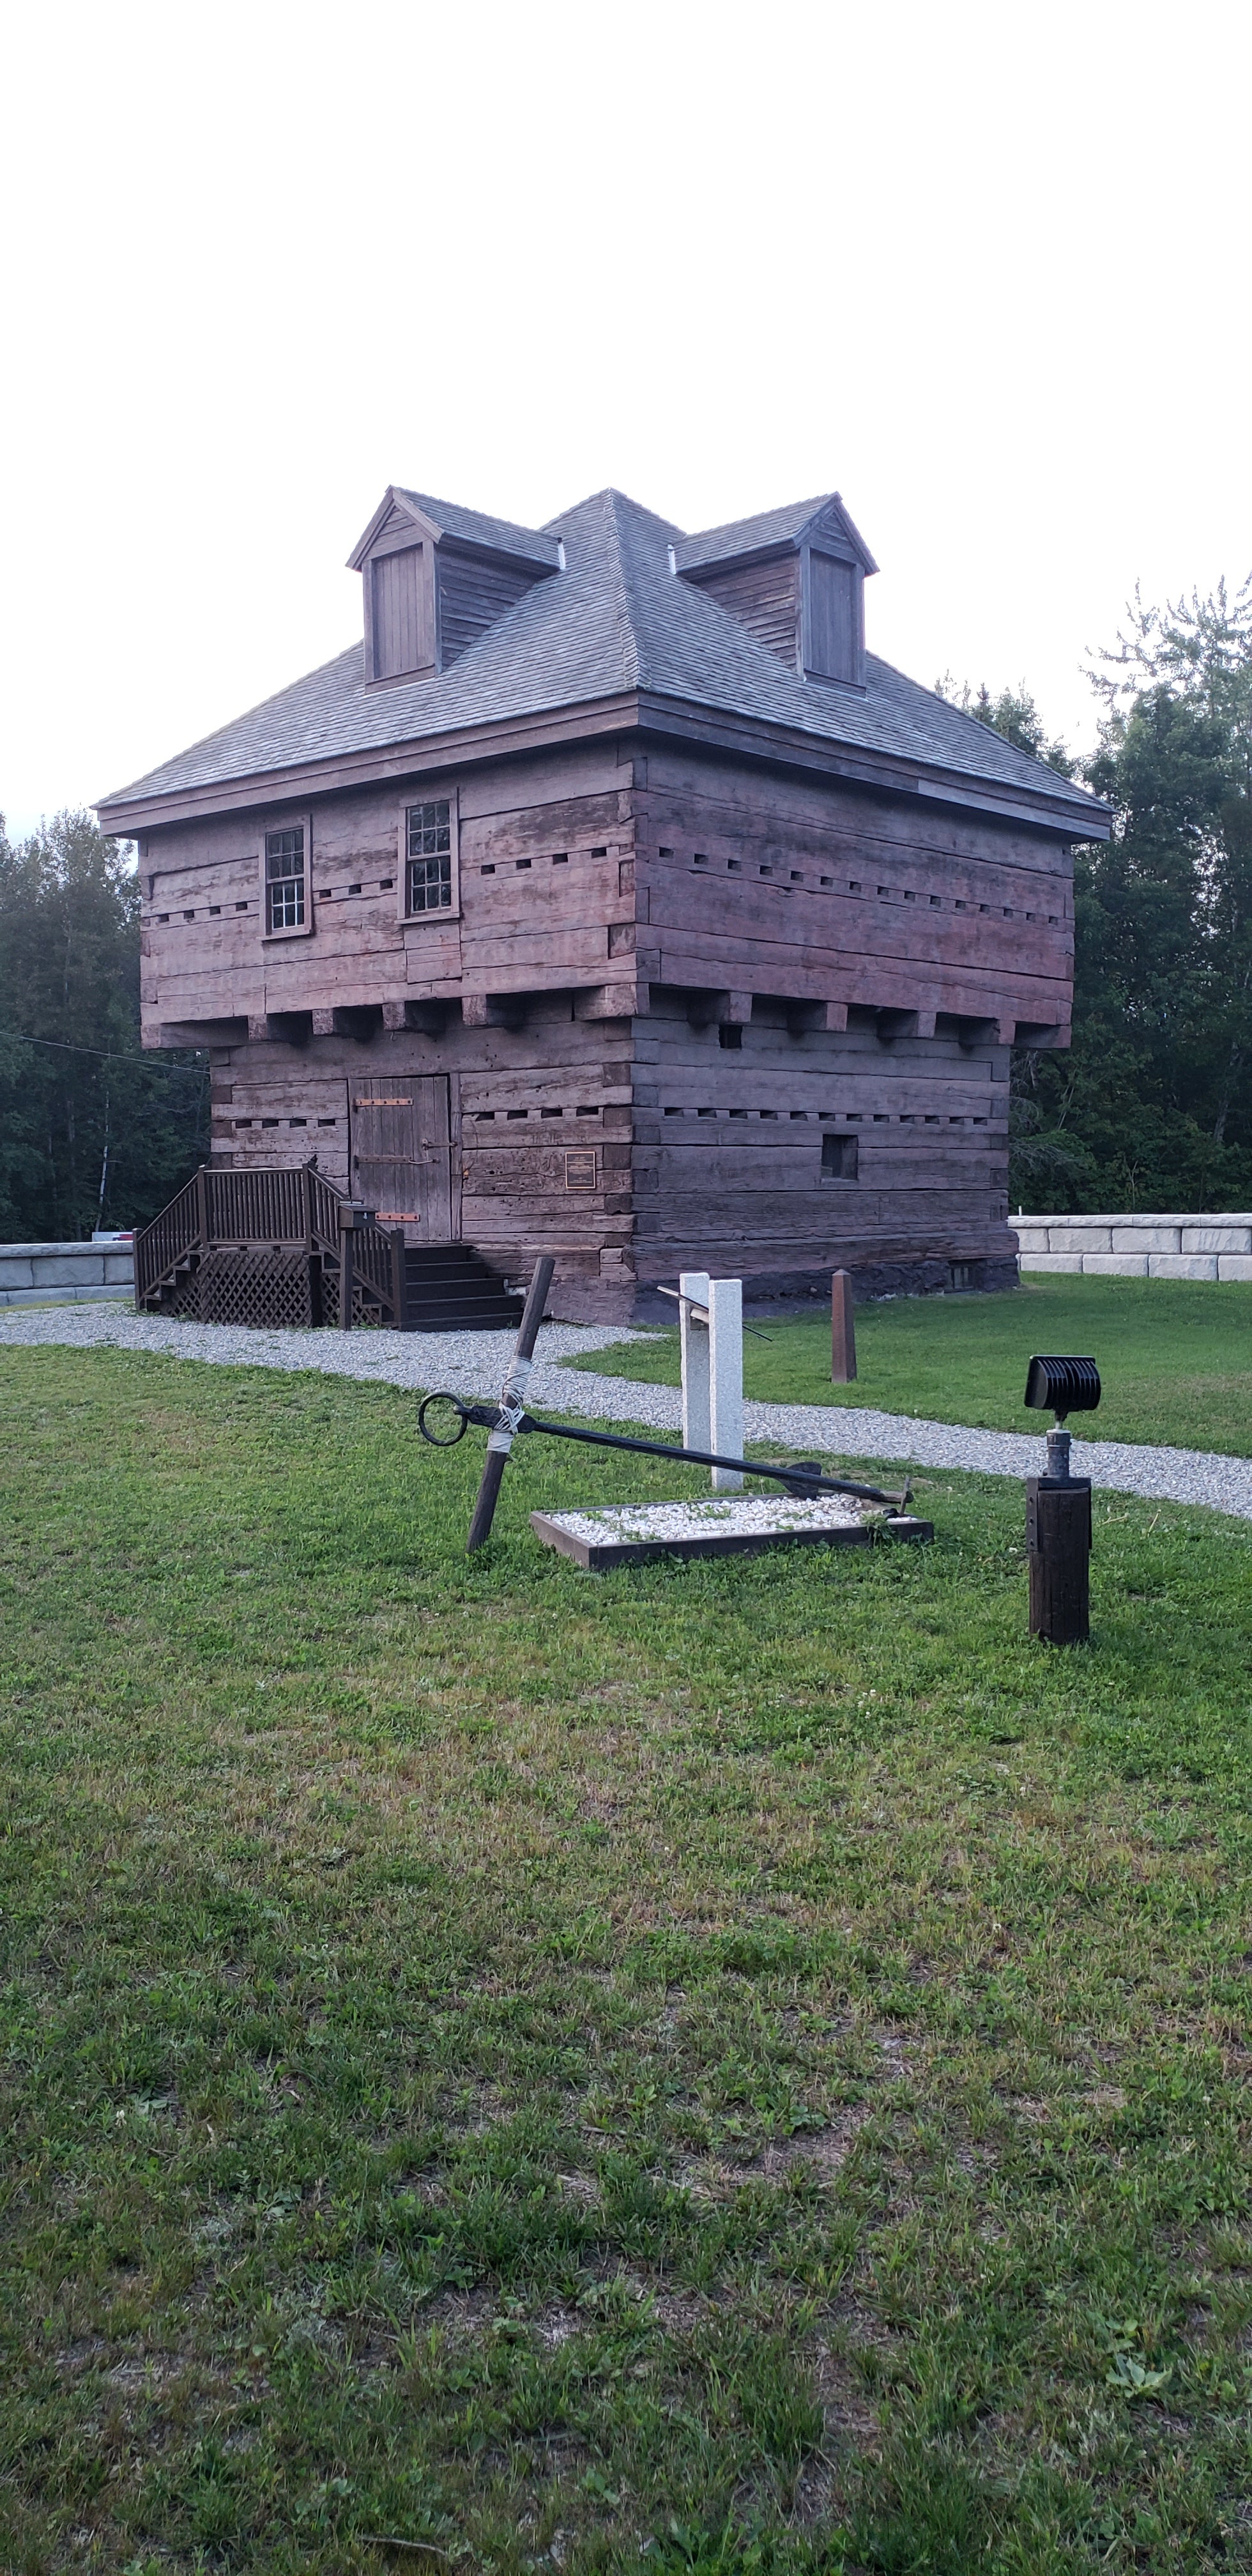 The Fort Kent Blockhouse, from the Aroostock War.